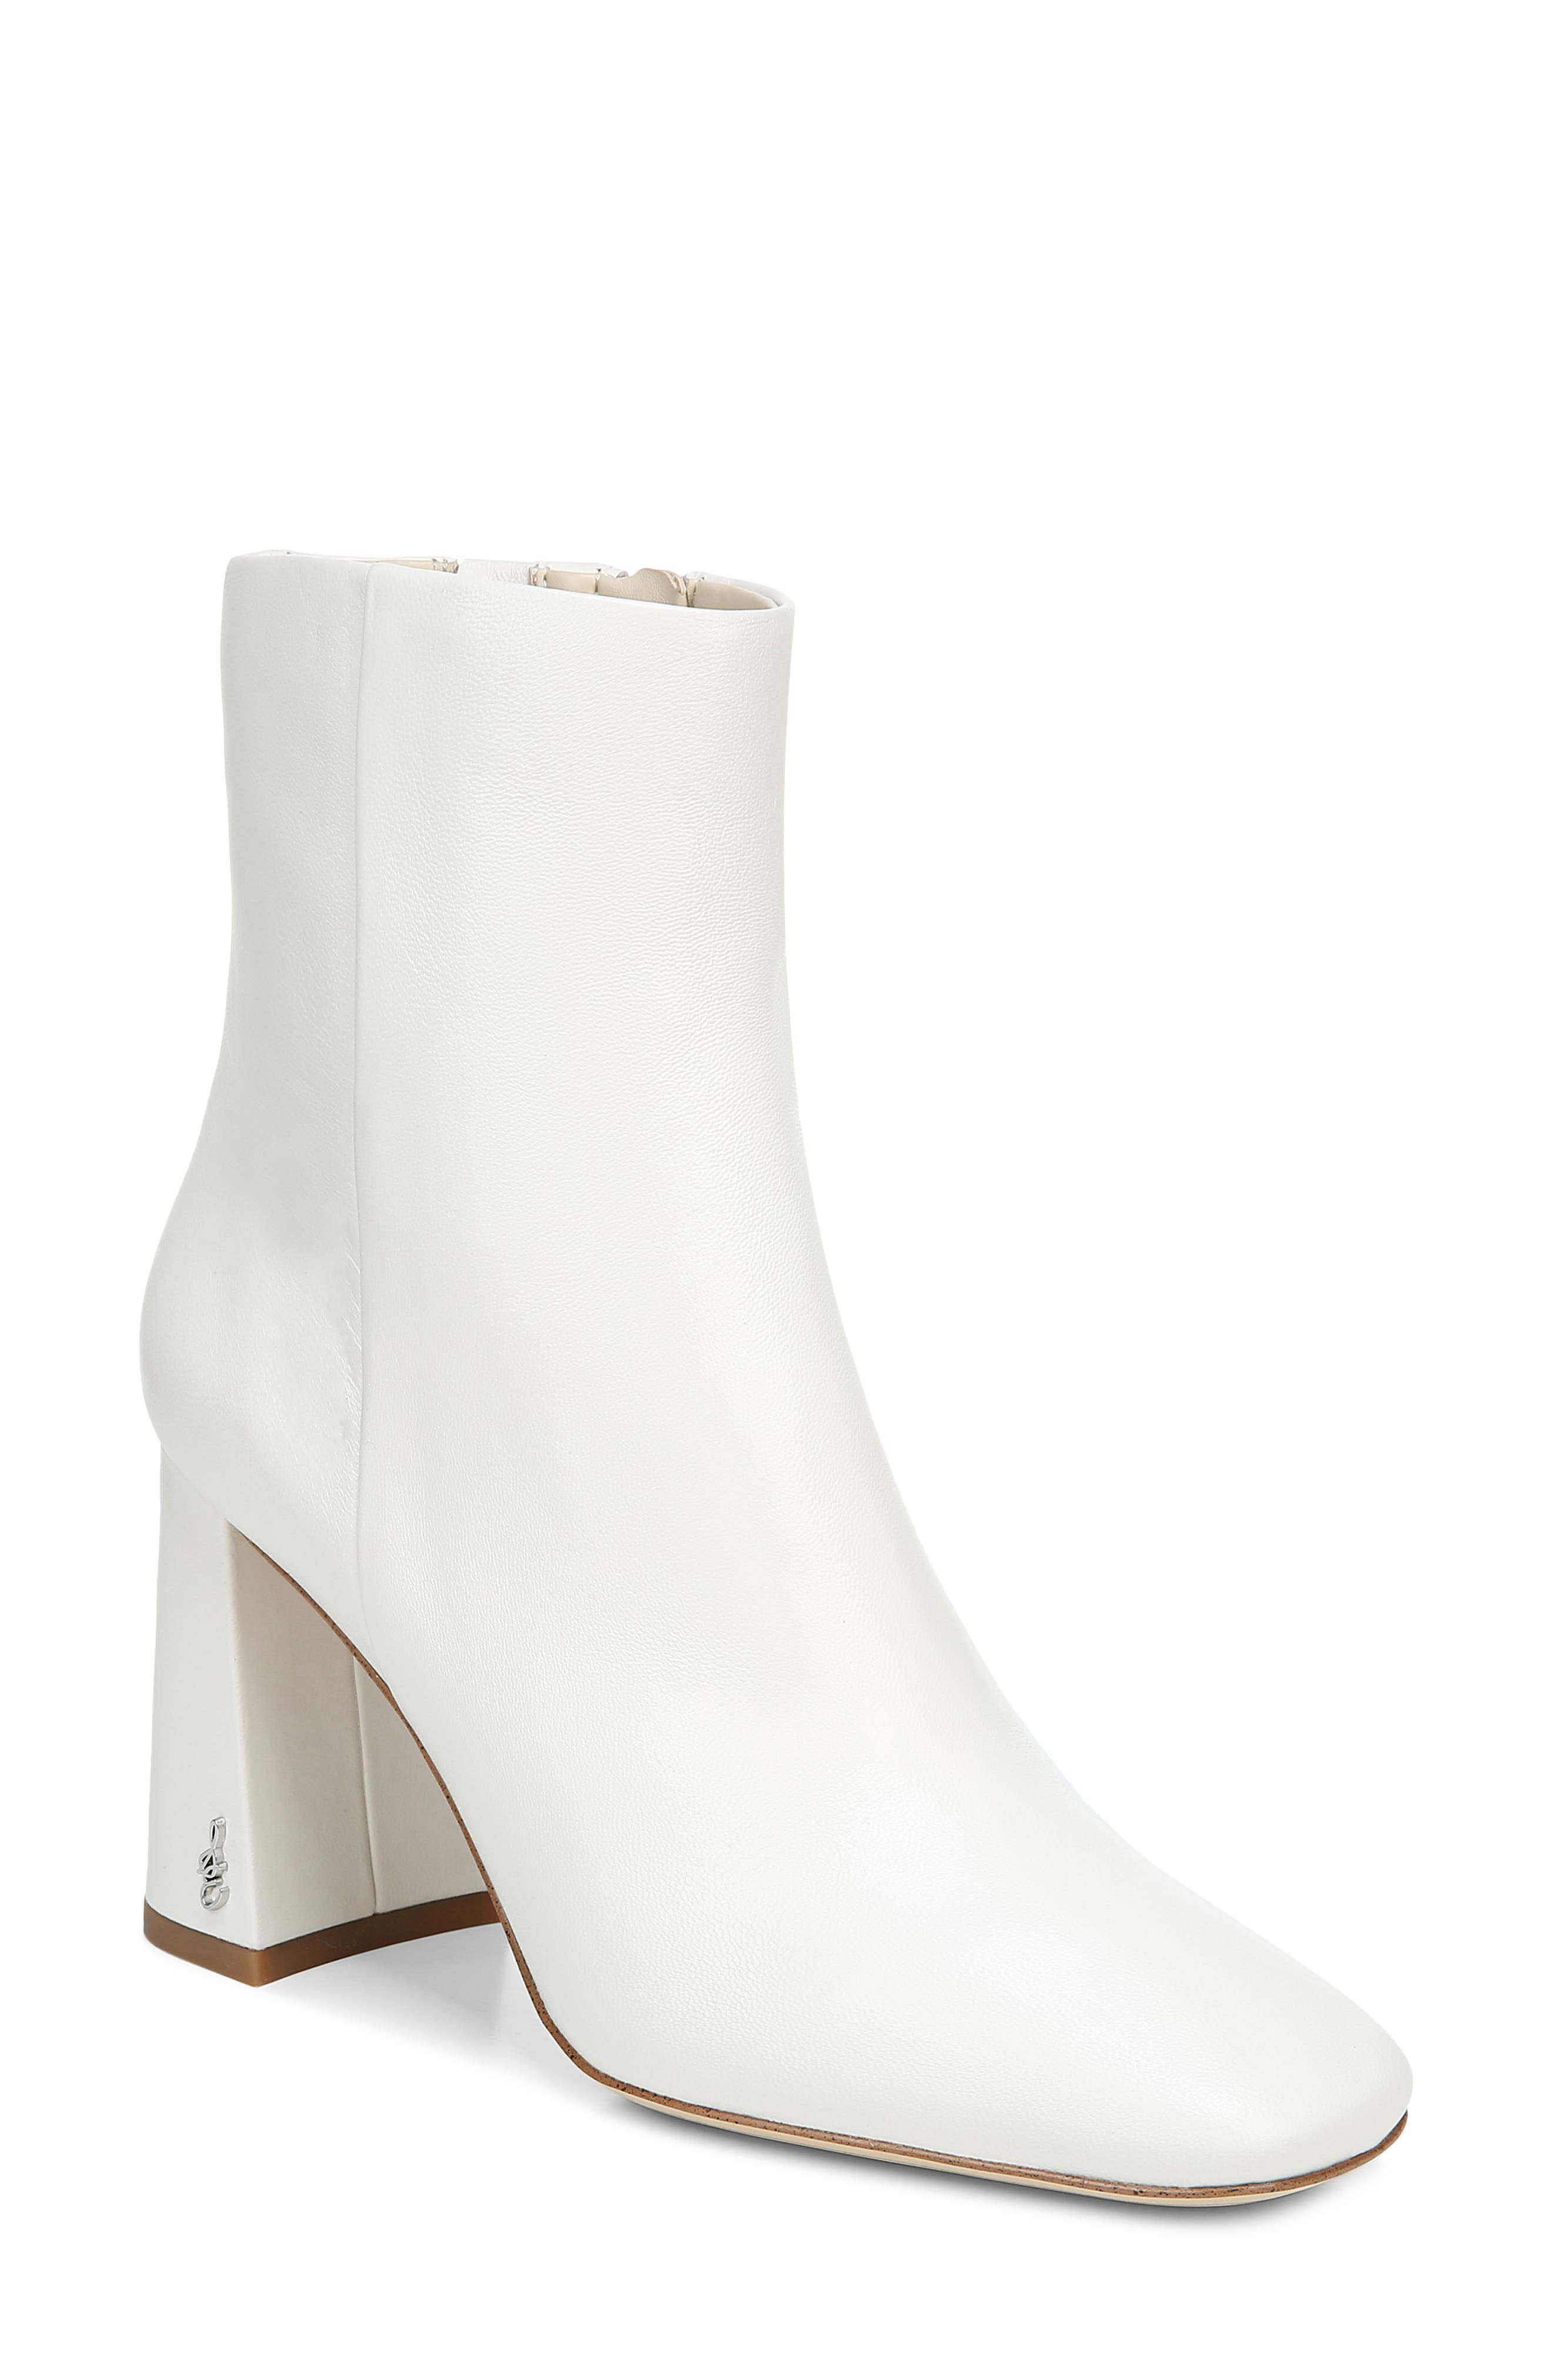 white booties size 7